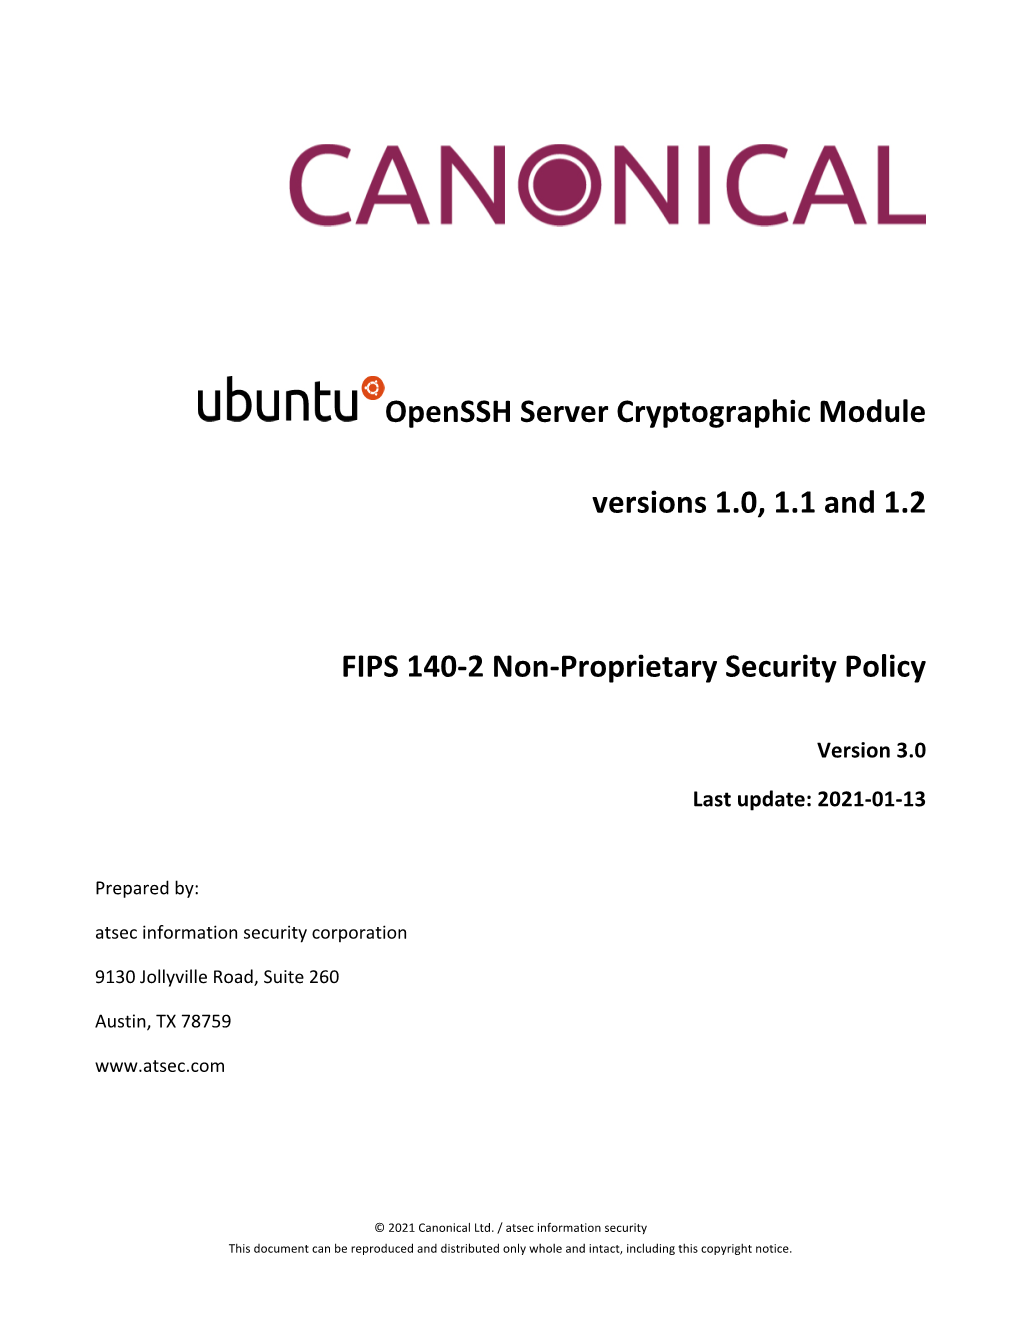 Openssh Server Cryptographic Module Versions 1.0, 1.1 and 1.2